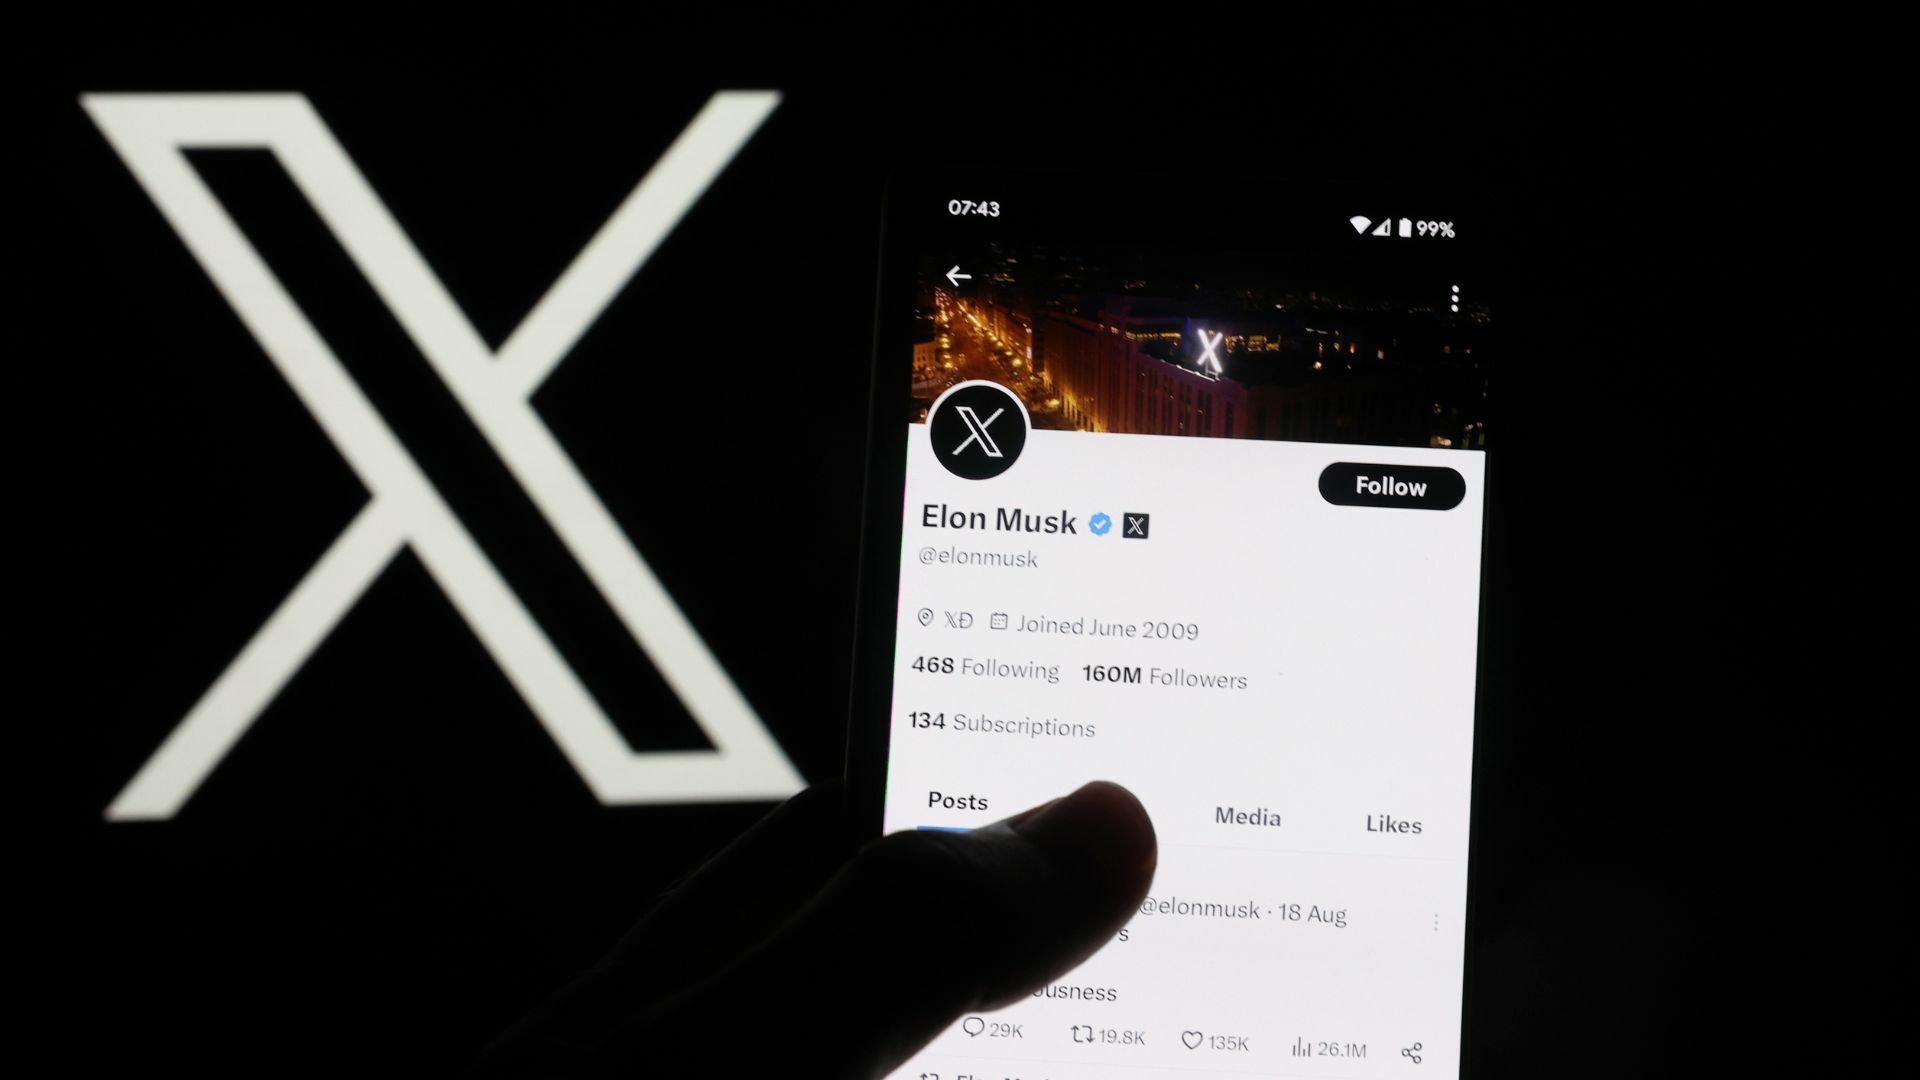 Elon Musk account on Twitter X is displayed on a smartphone.